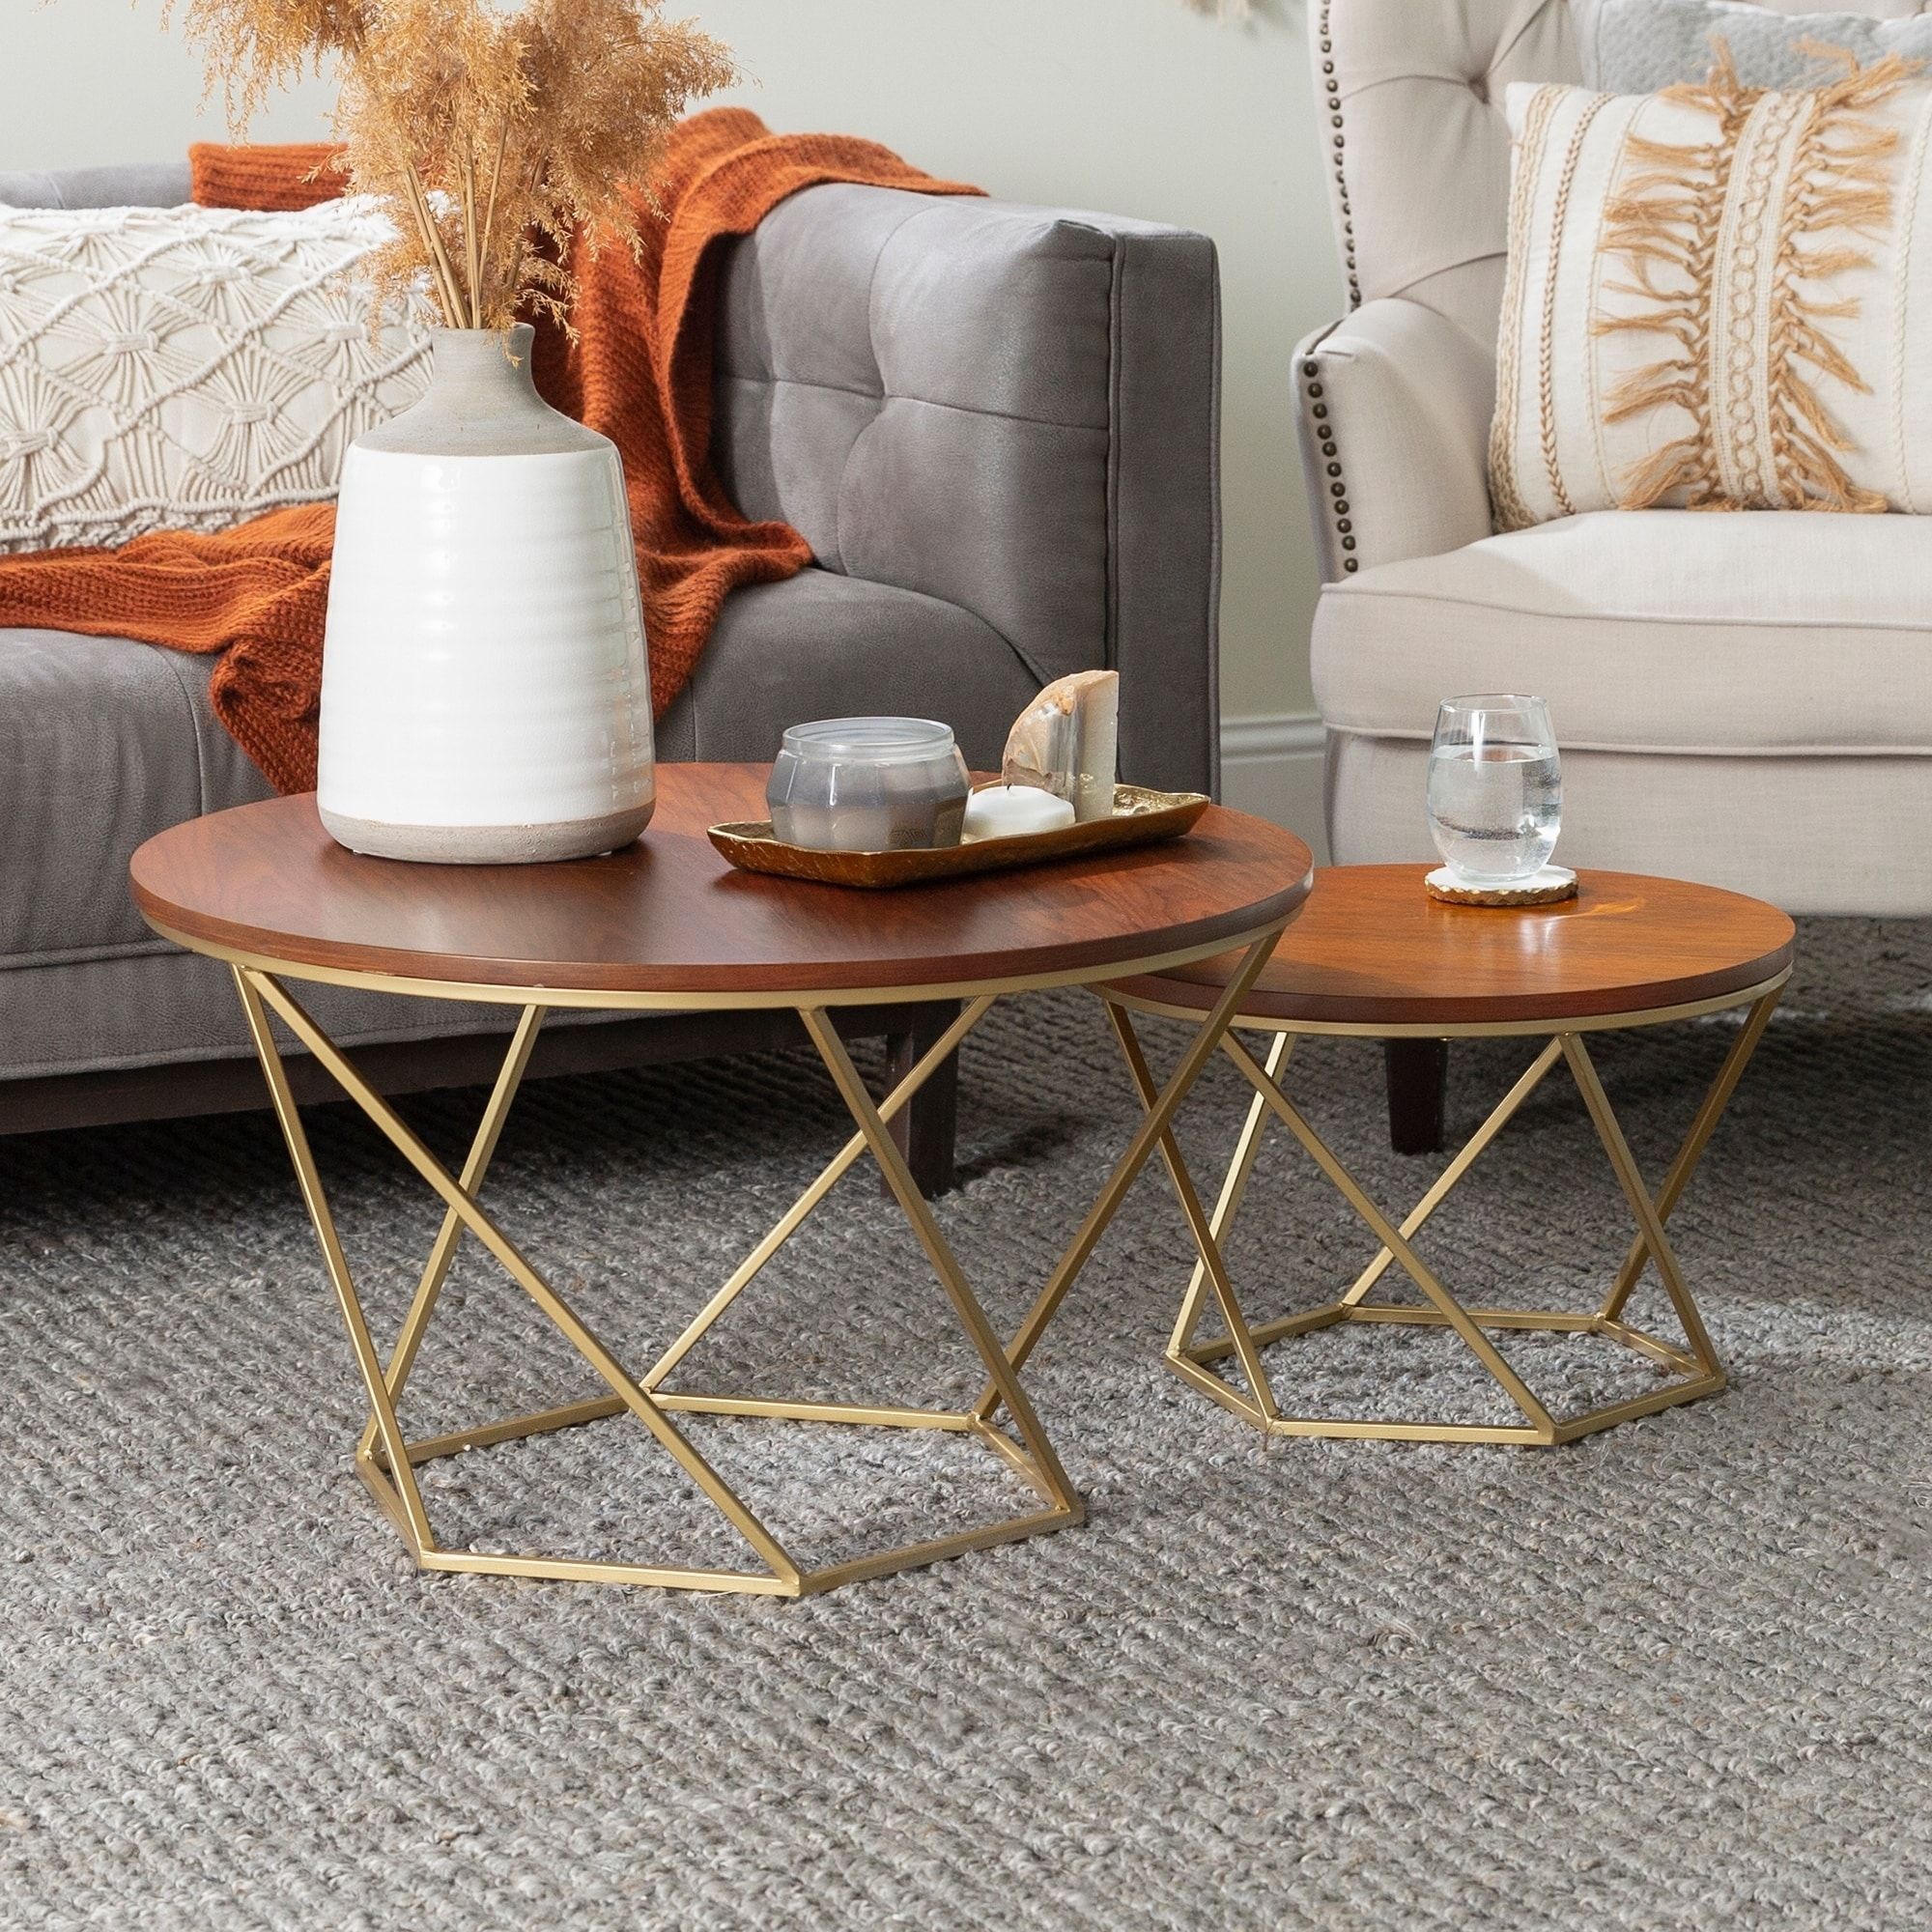 Silver Orchid Grant Geometric Wood Nesting Coffee Tables In Geometric Coffee Tables (View 2 of 15)